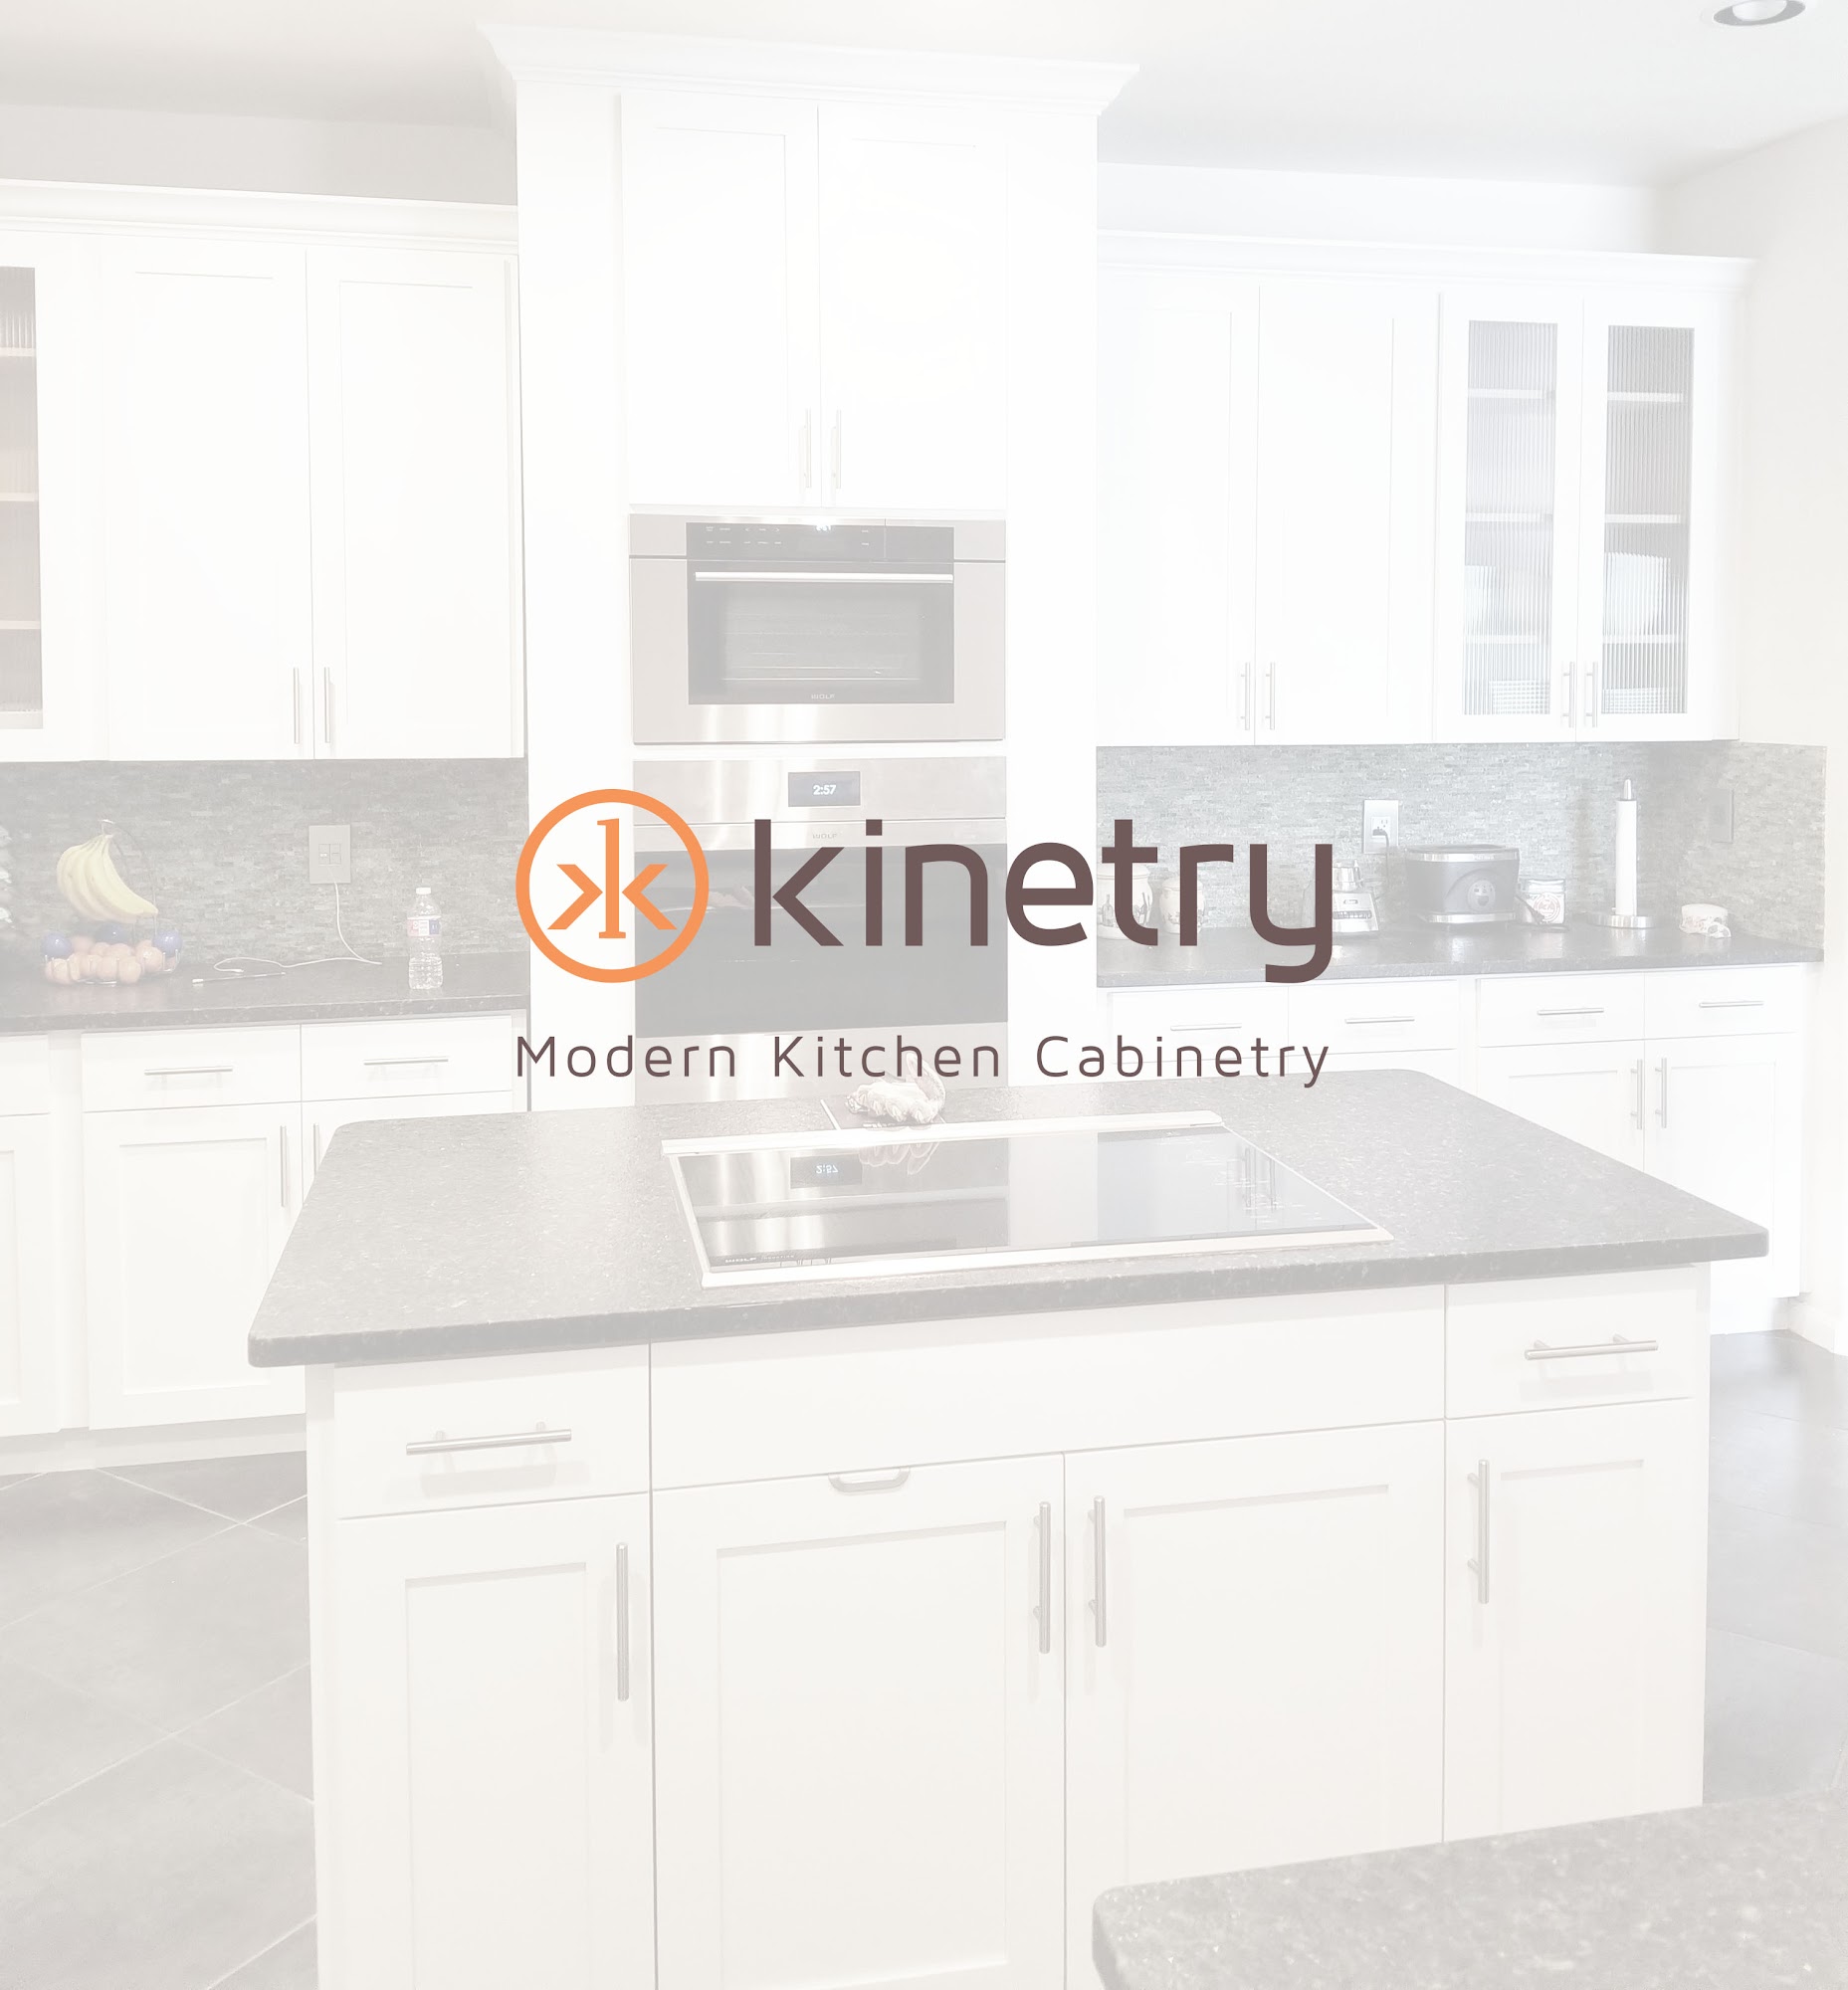 Kinetry Modern Kitchen Cabinetry